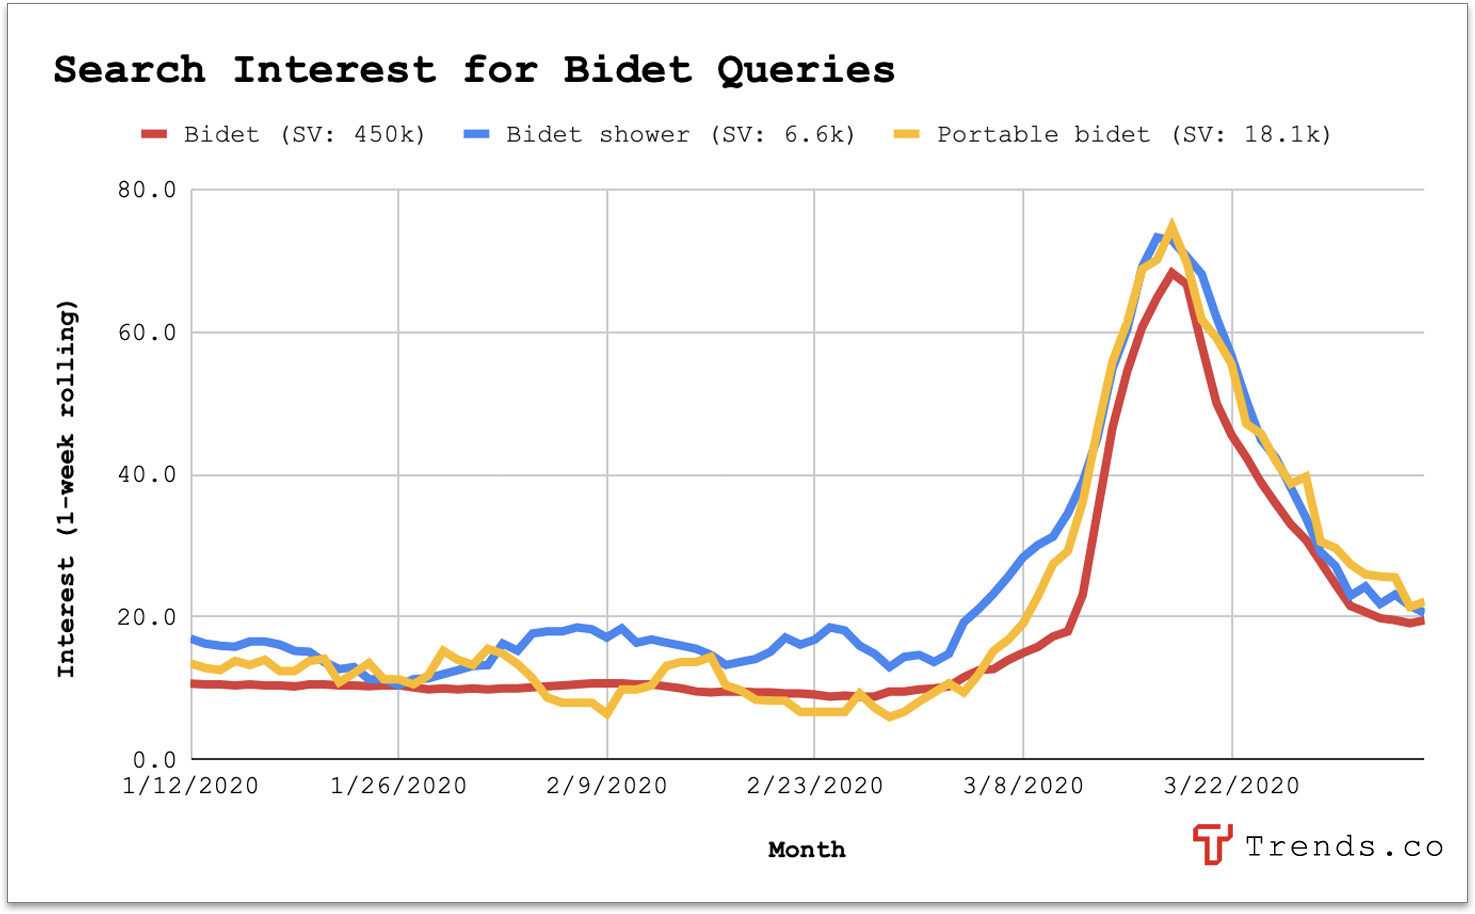 Search interest for bidet queries from Jan 1, 2020, to March 22, 2020.